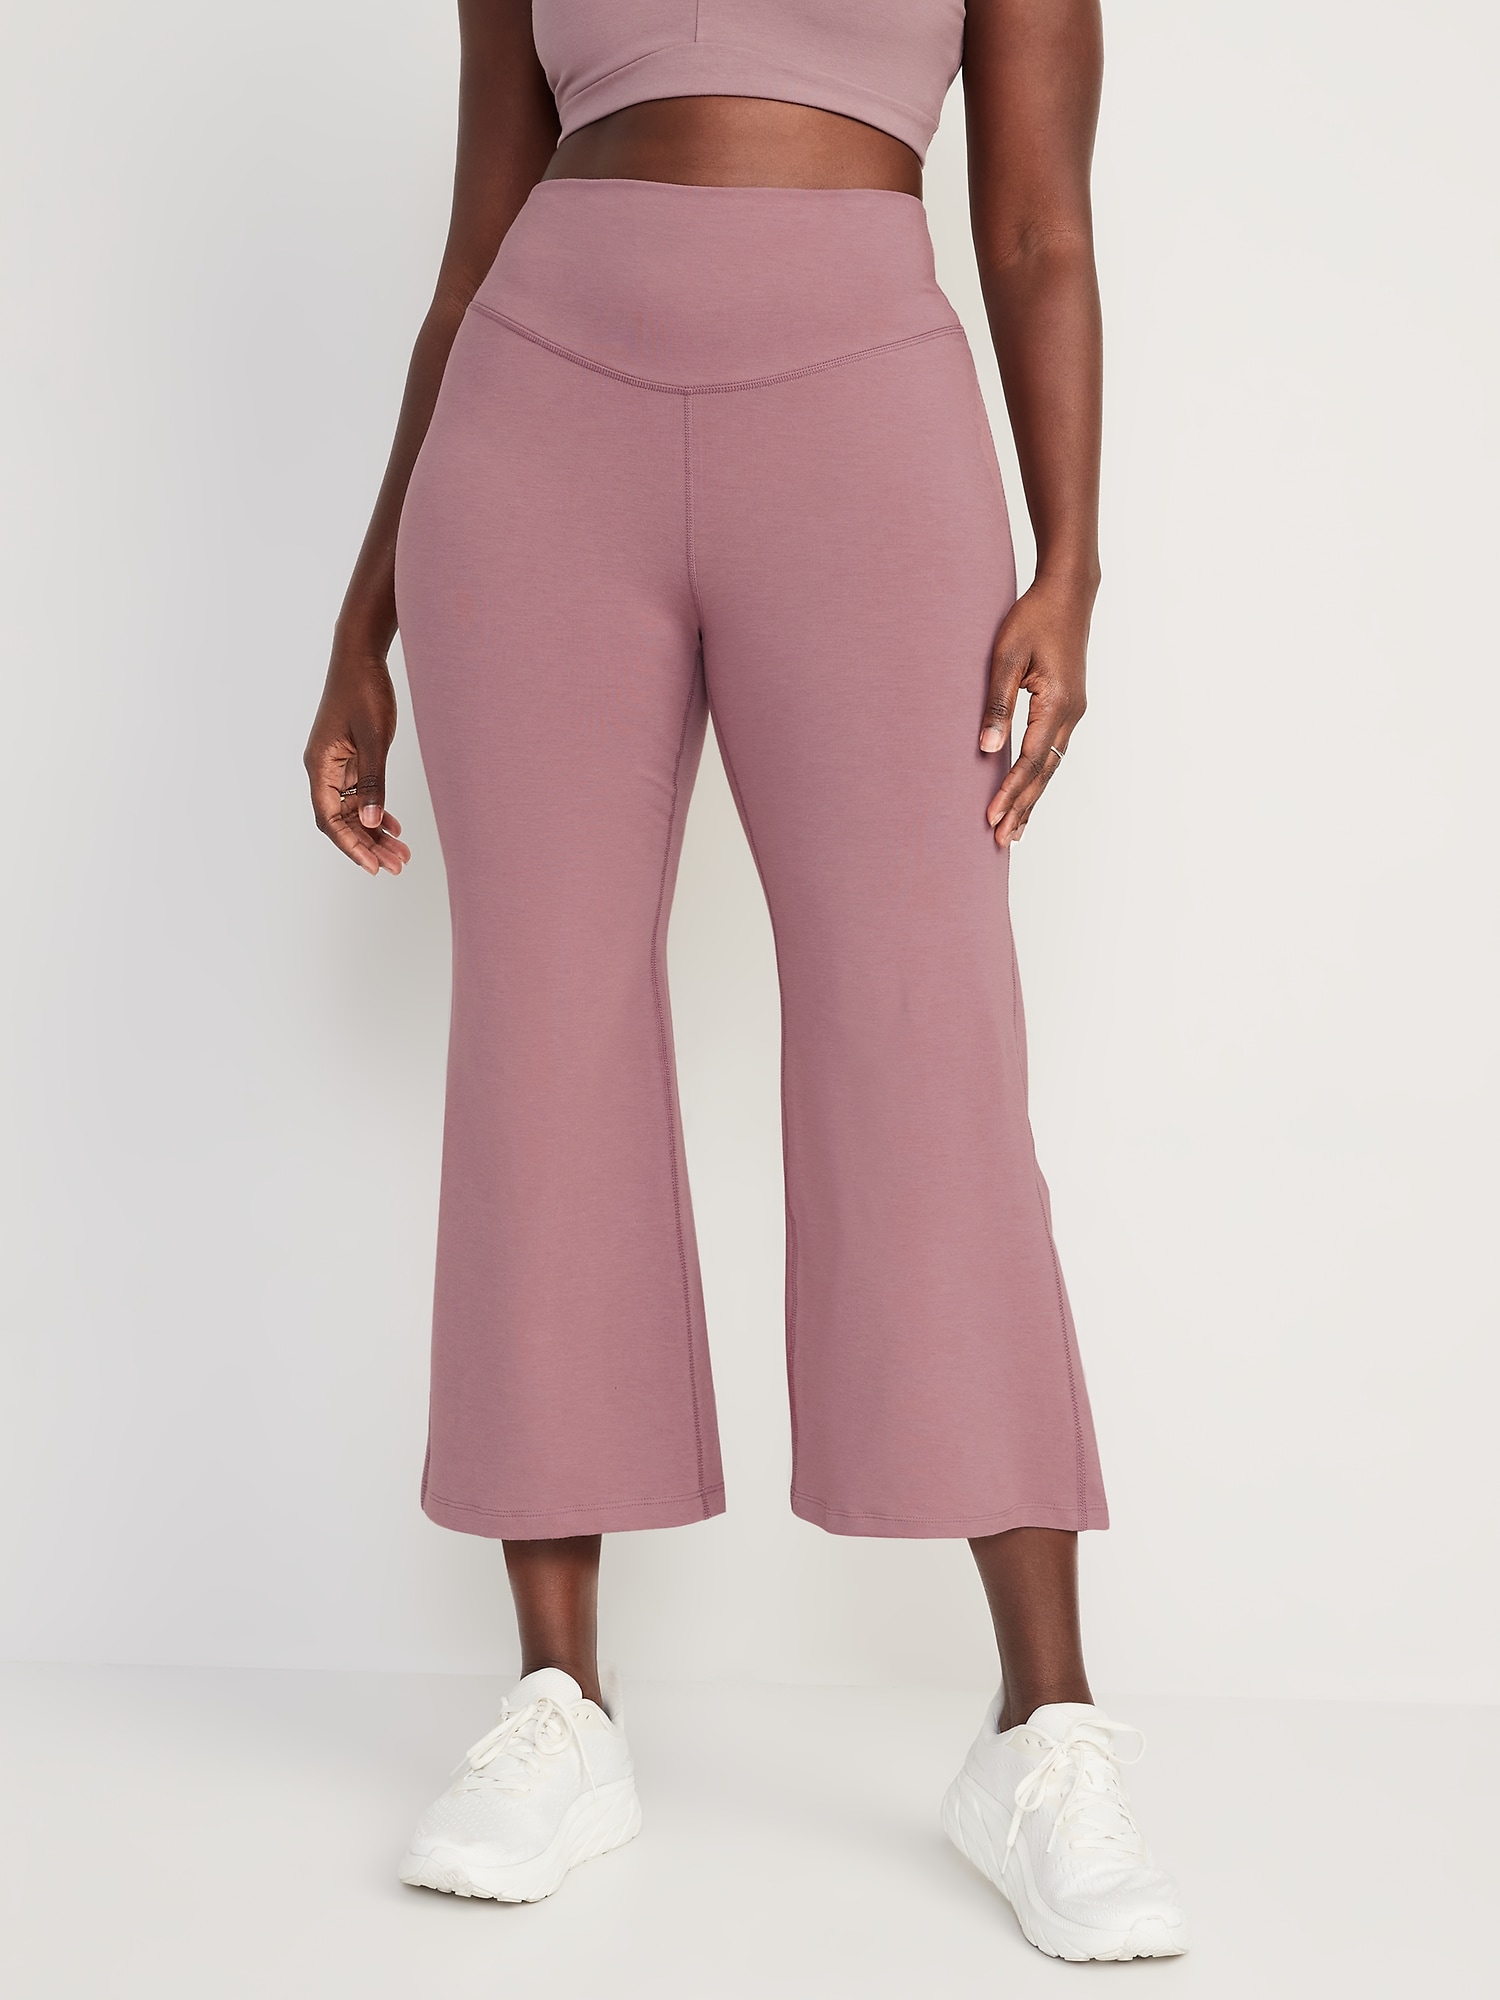 Extra High-Waisted PowerChill Wide-Leg Pants for Women, Old Navy